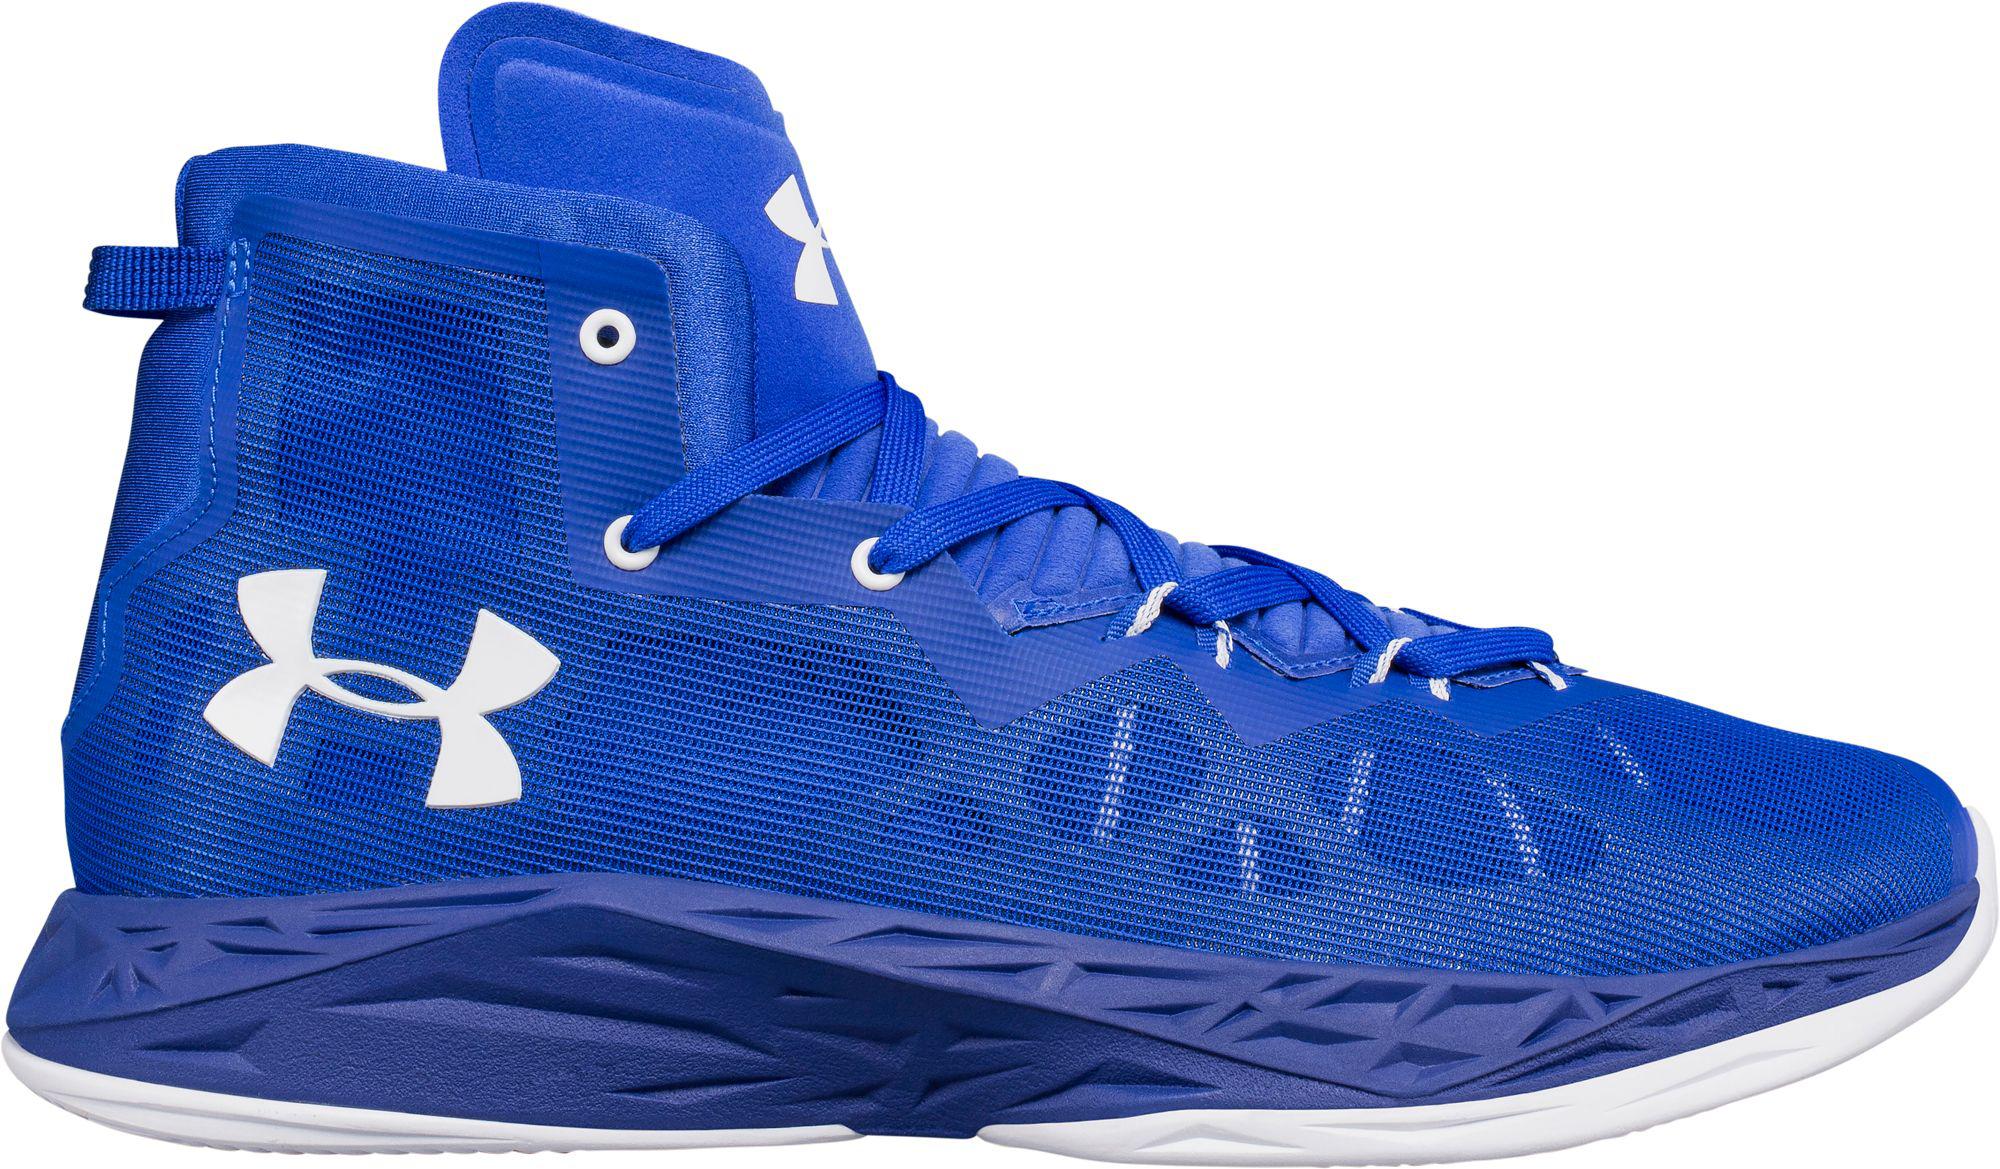 under armour basketball shoes blue and white